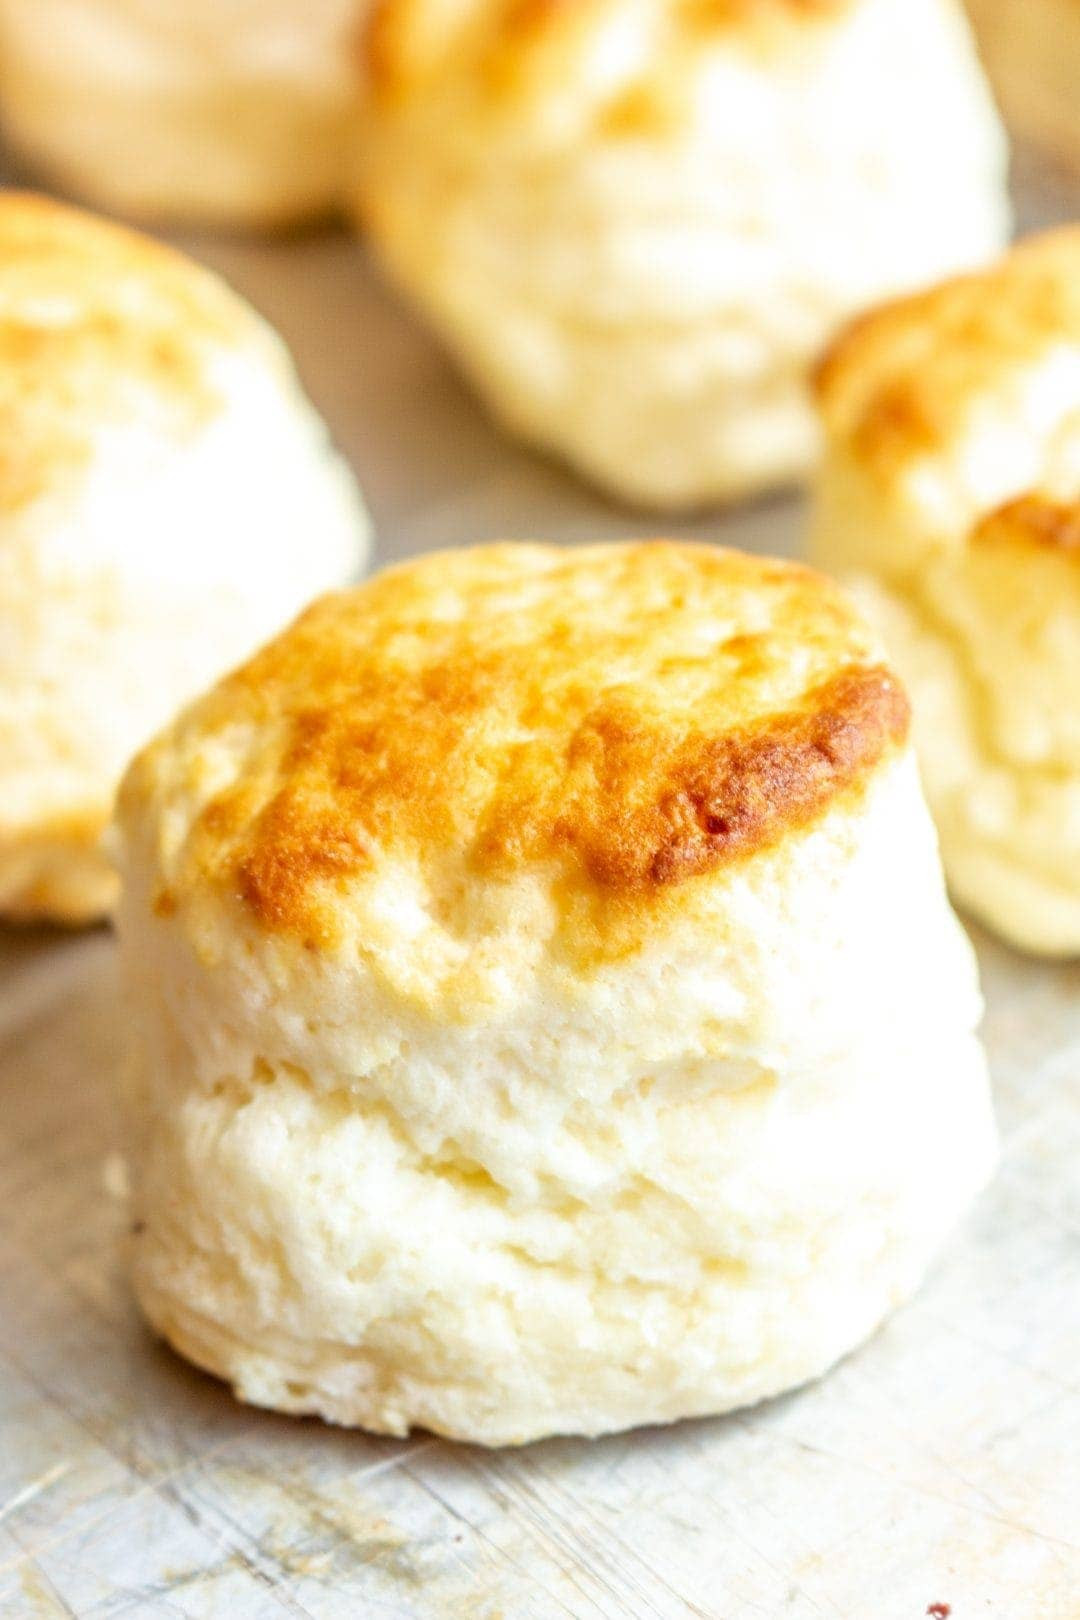 Gluten Free Biscuit Recipe Best Of Easy Gluten Free Biscuits Dairy Free Option Life after